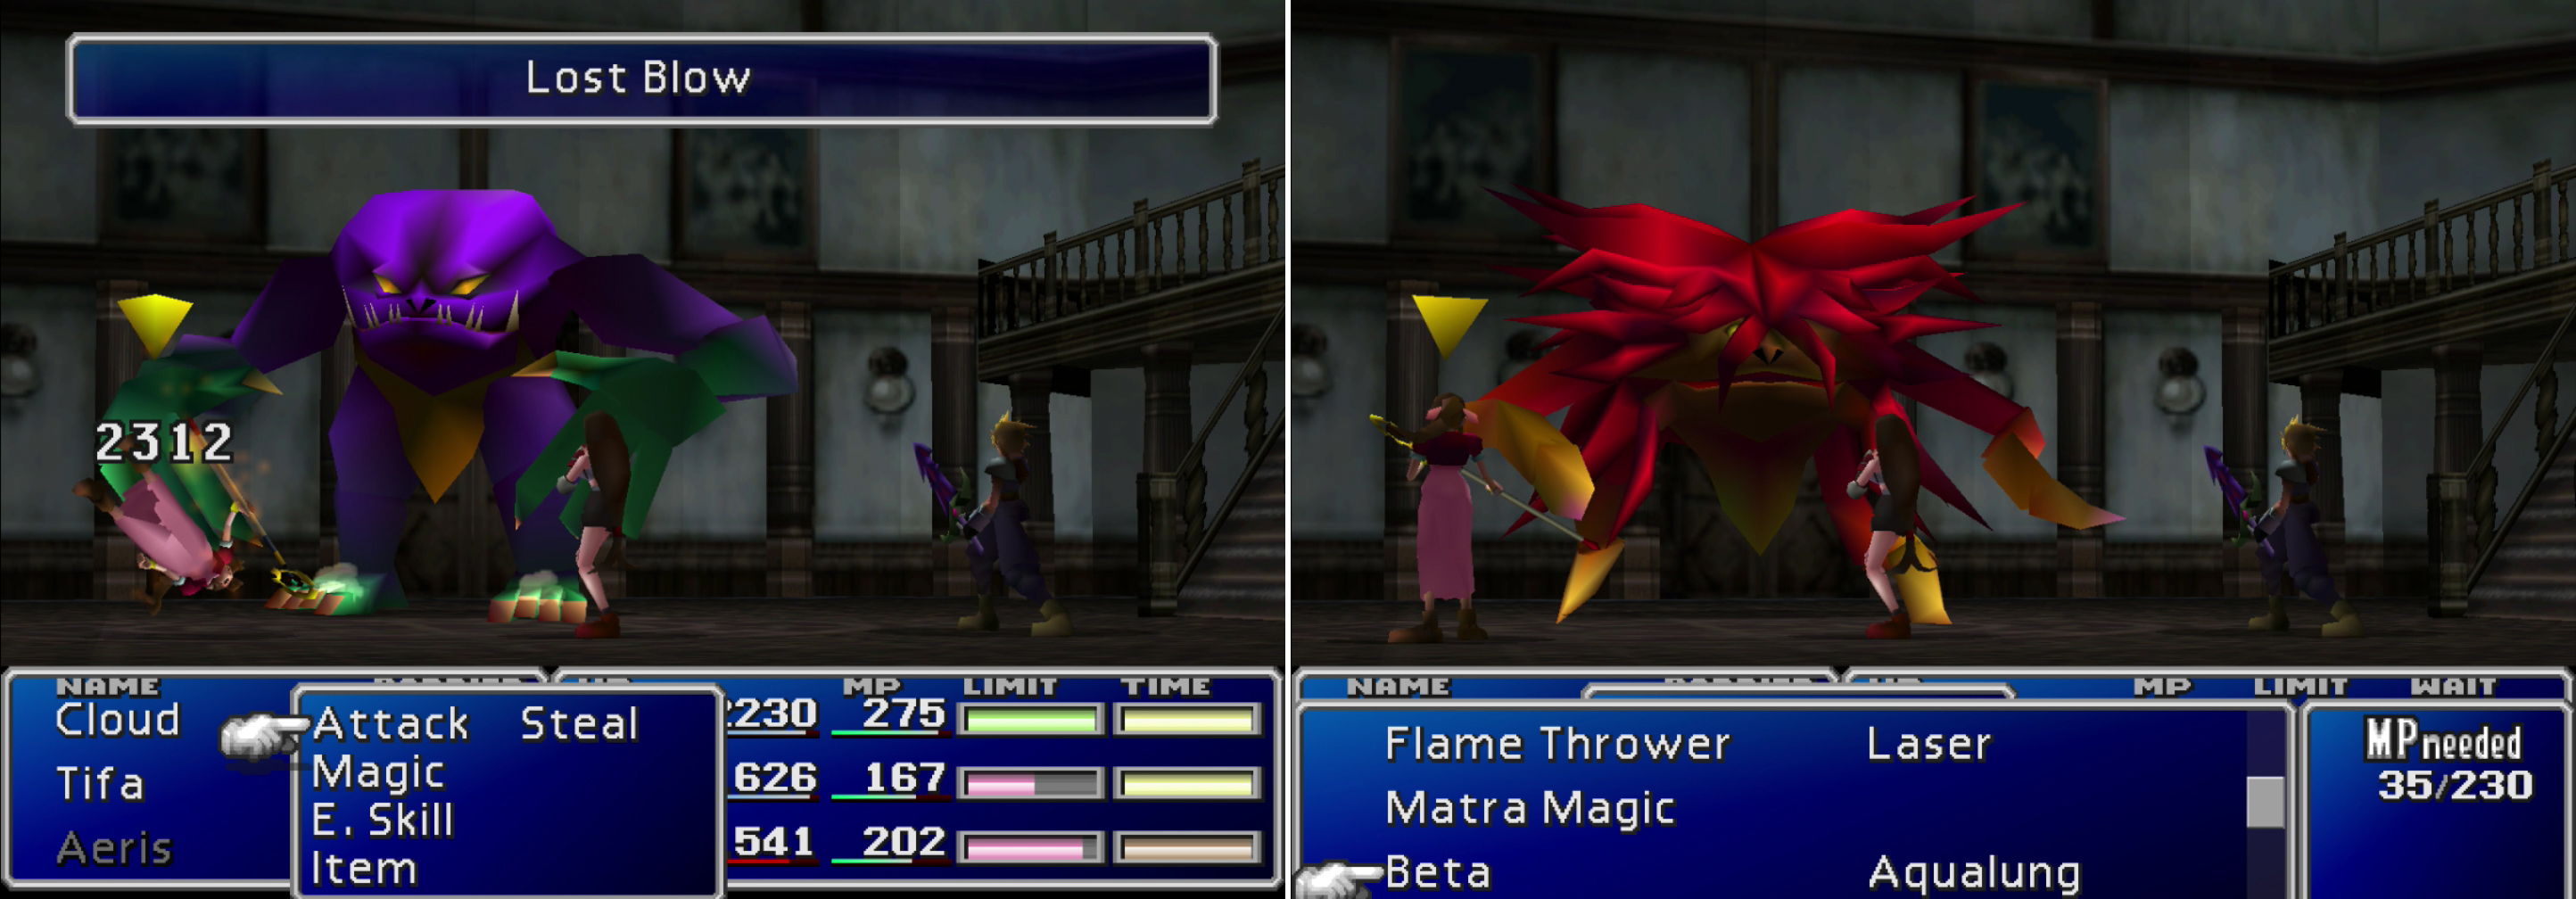 Depending on what type of damage (phyisical or magical) you deal to Lost Number at the beginning of the fight, it'll turn into either it's purple (left) or red (right) form later on. Considering the power of its "Lost Blow" attack (also left), it's wiser to try to trigger its red form.